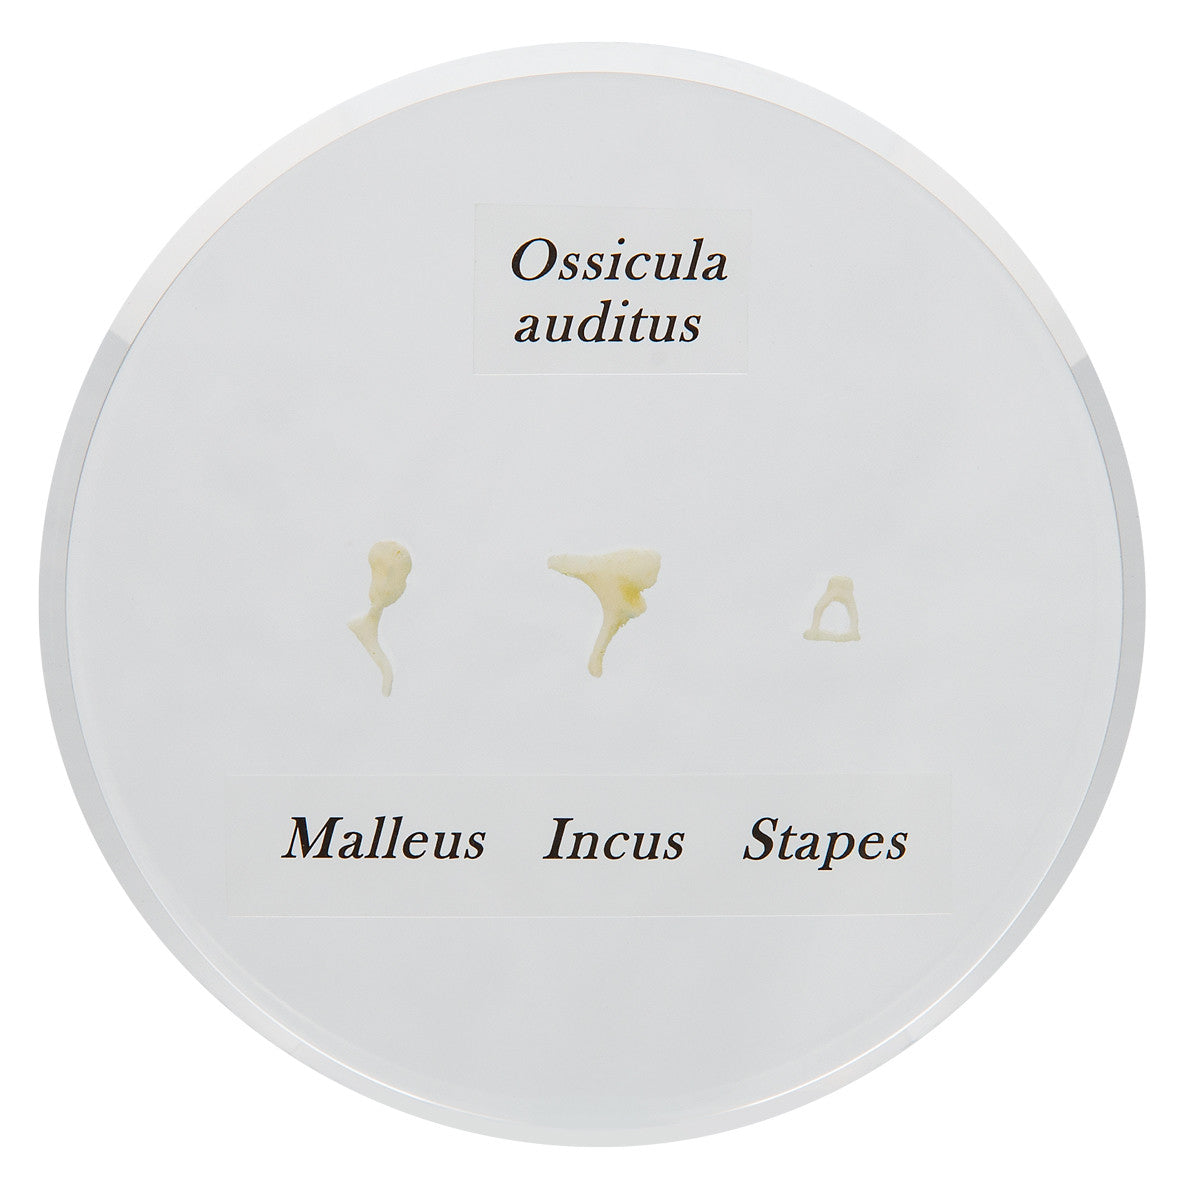 Model of Life-size Auditory Ossicles | 3B Scientific E13